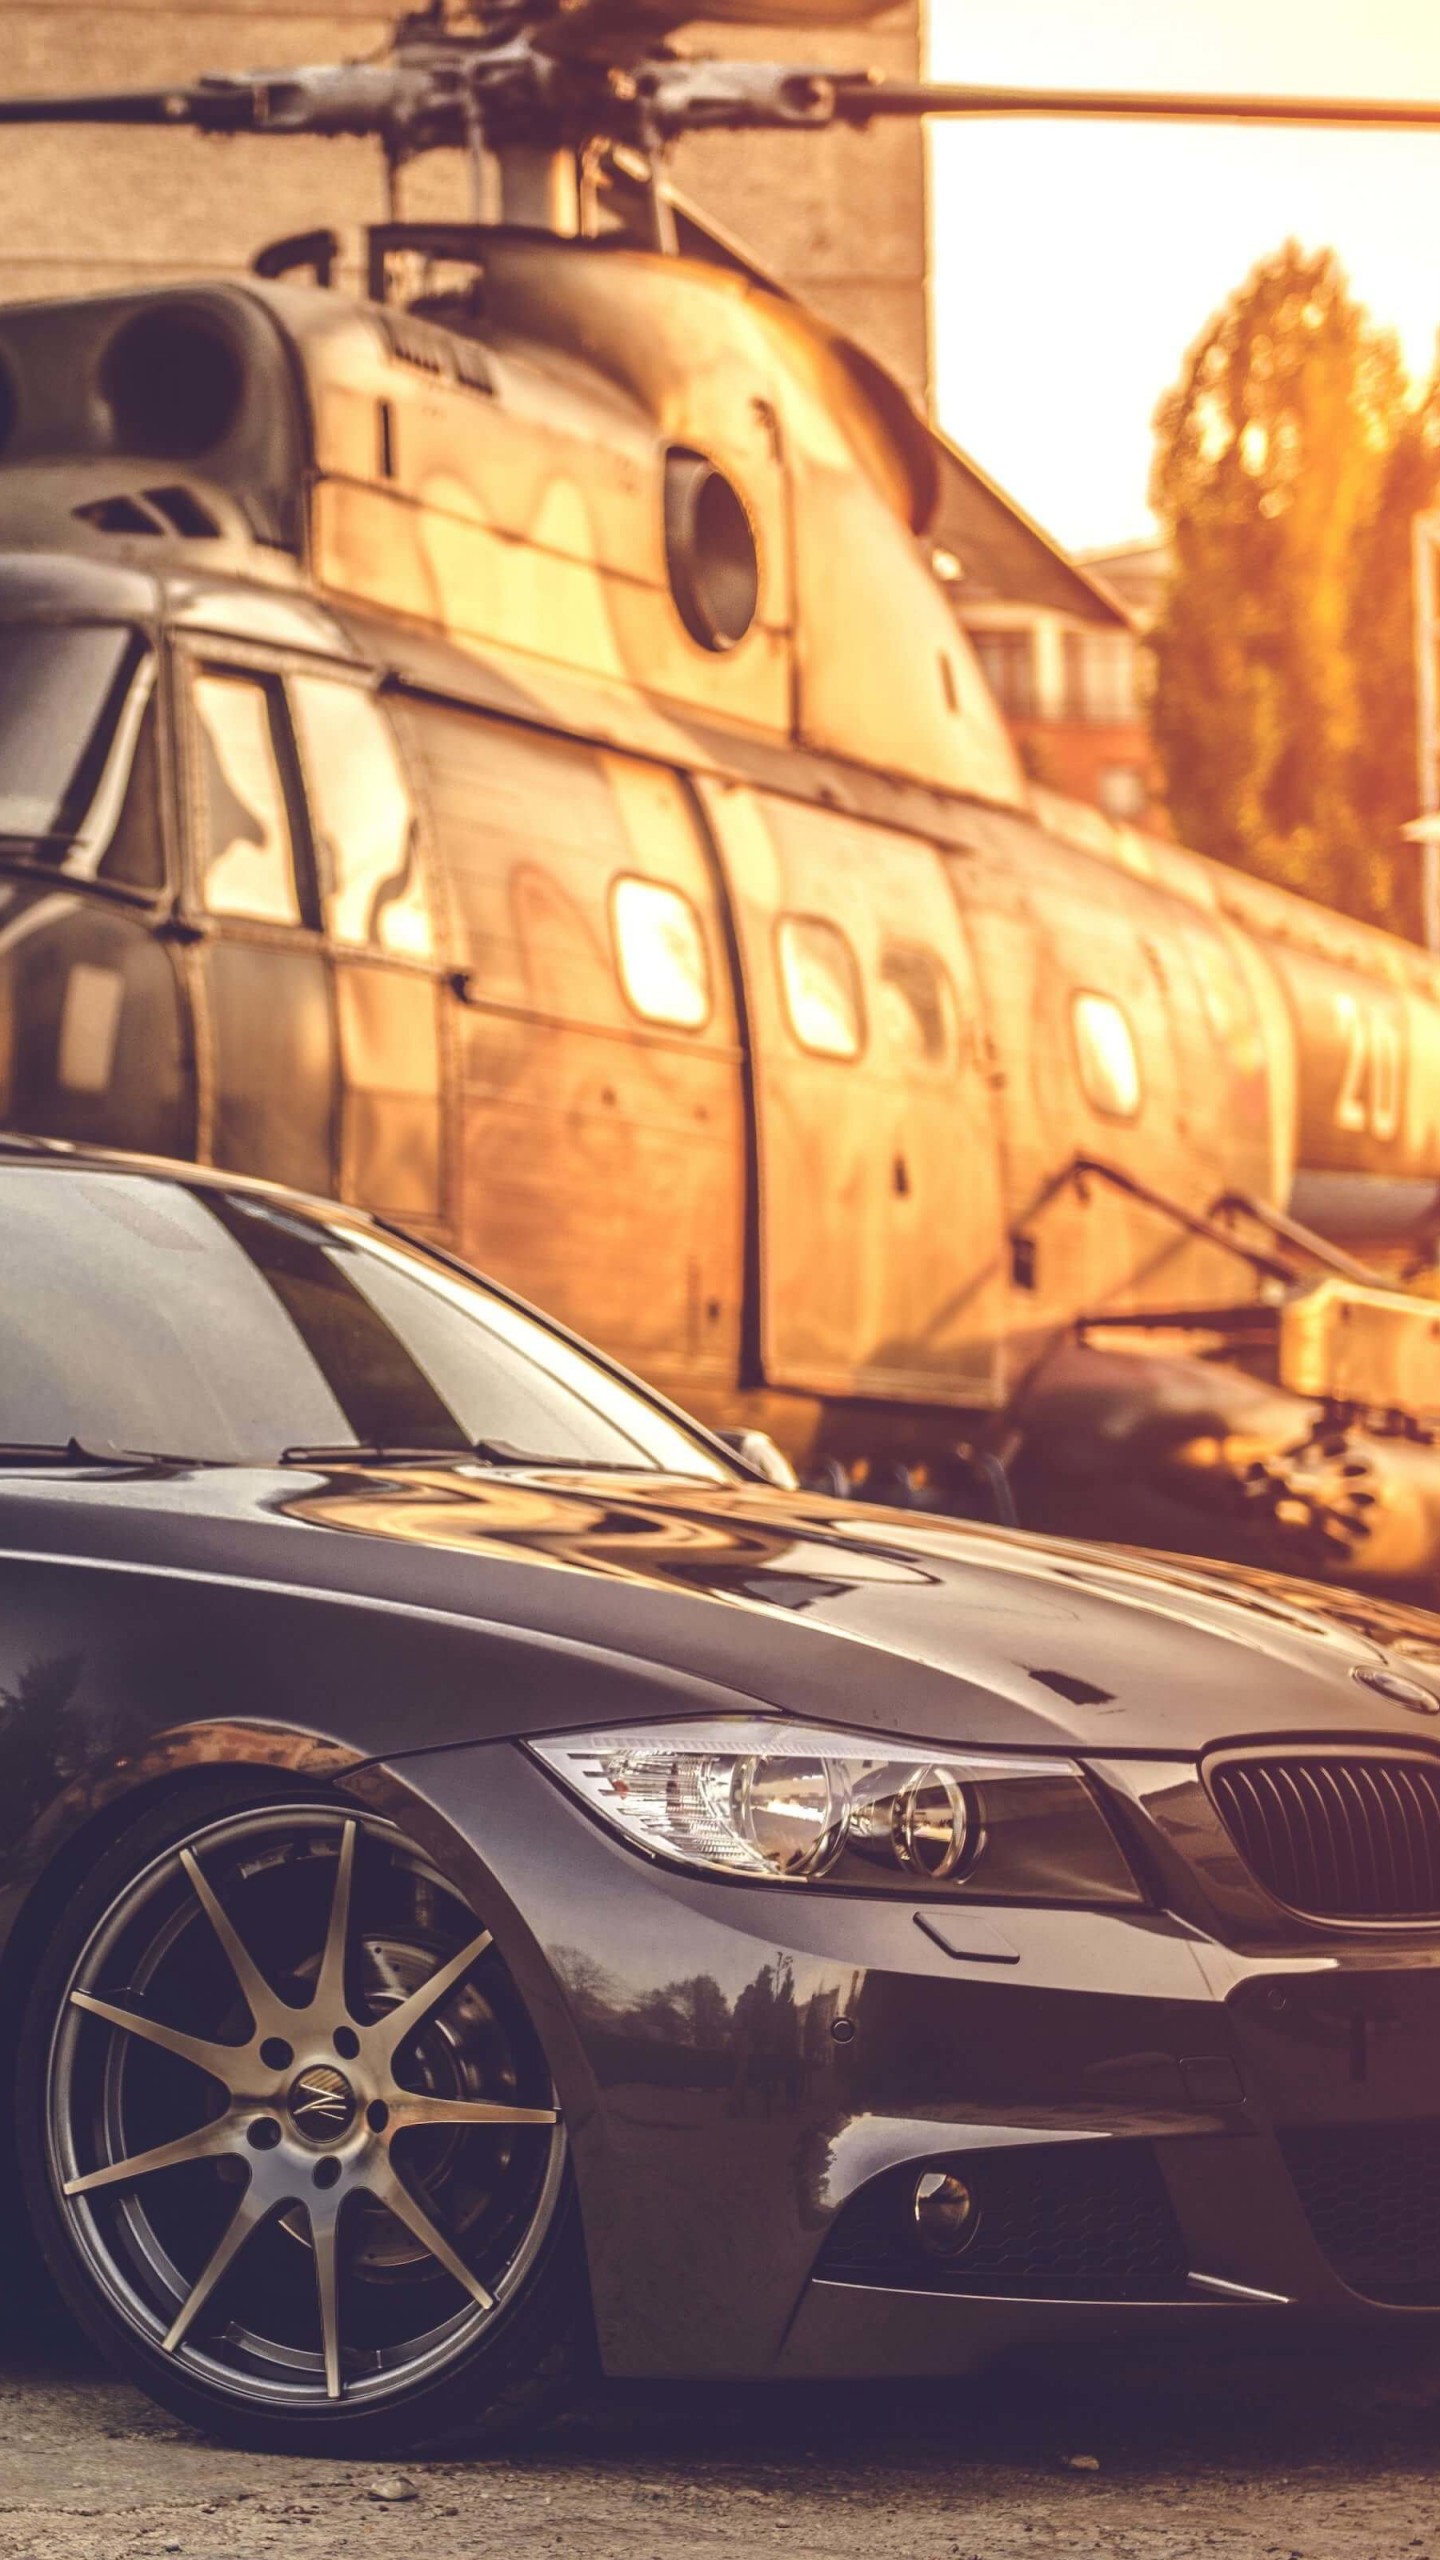 BMW E90 on Z-Performance Wheels Wallpaper for SAMSUNG Galaxy Note 4